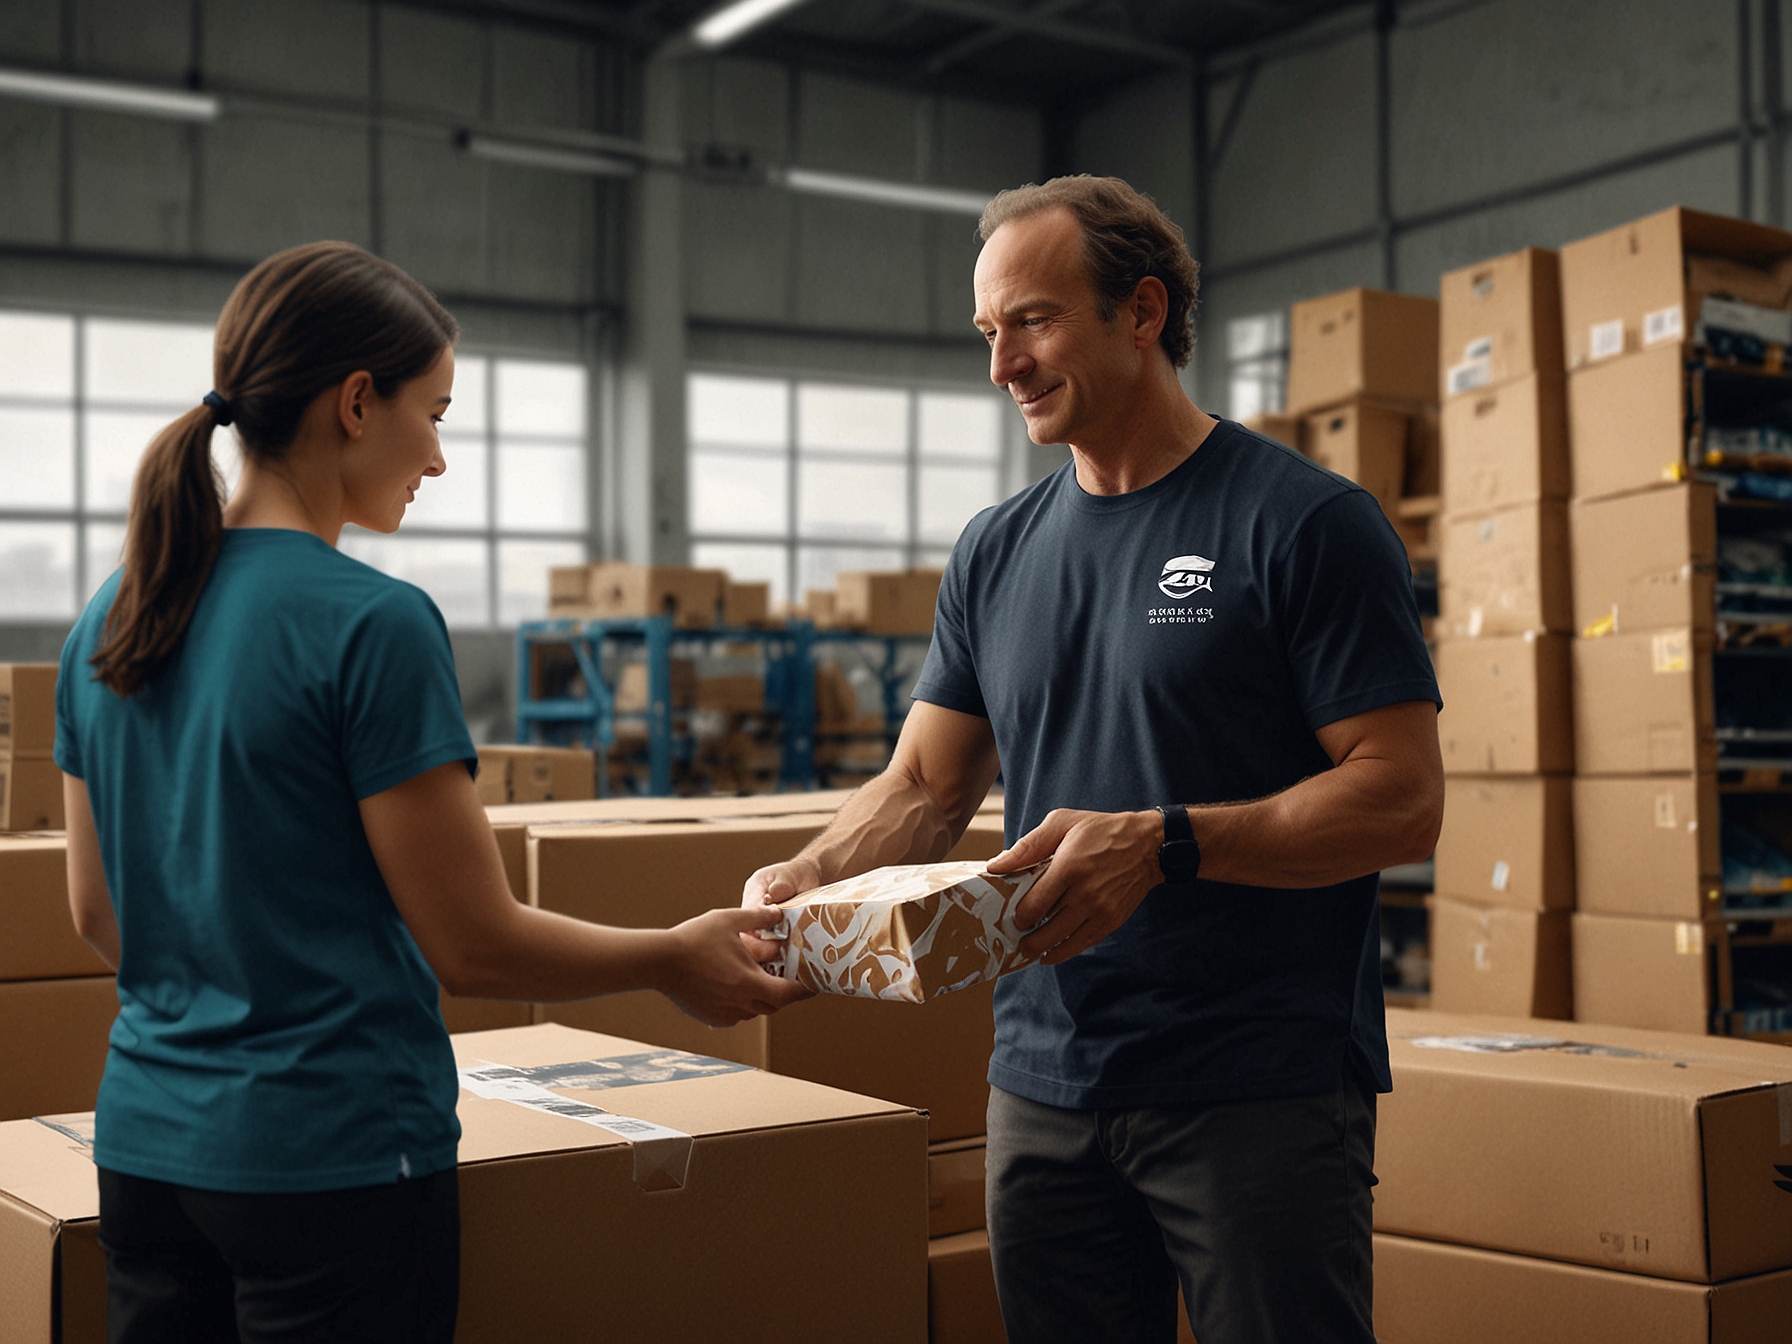 An Amazon warehouse worker is shown packing a box with crumpled paper instead of plastic air pillows, highlighting the company’s new sustainable packaging initiative.